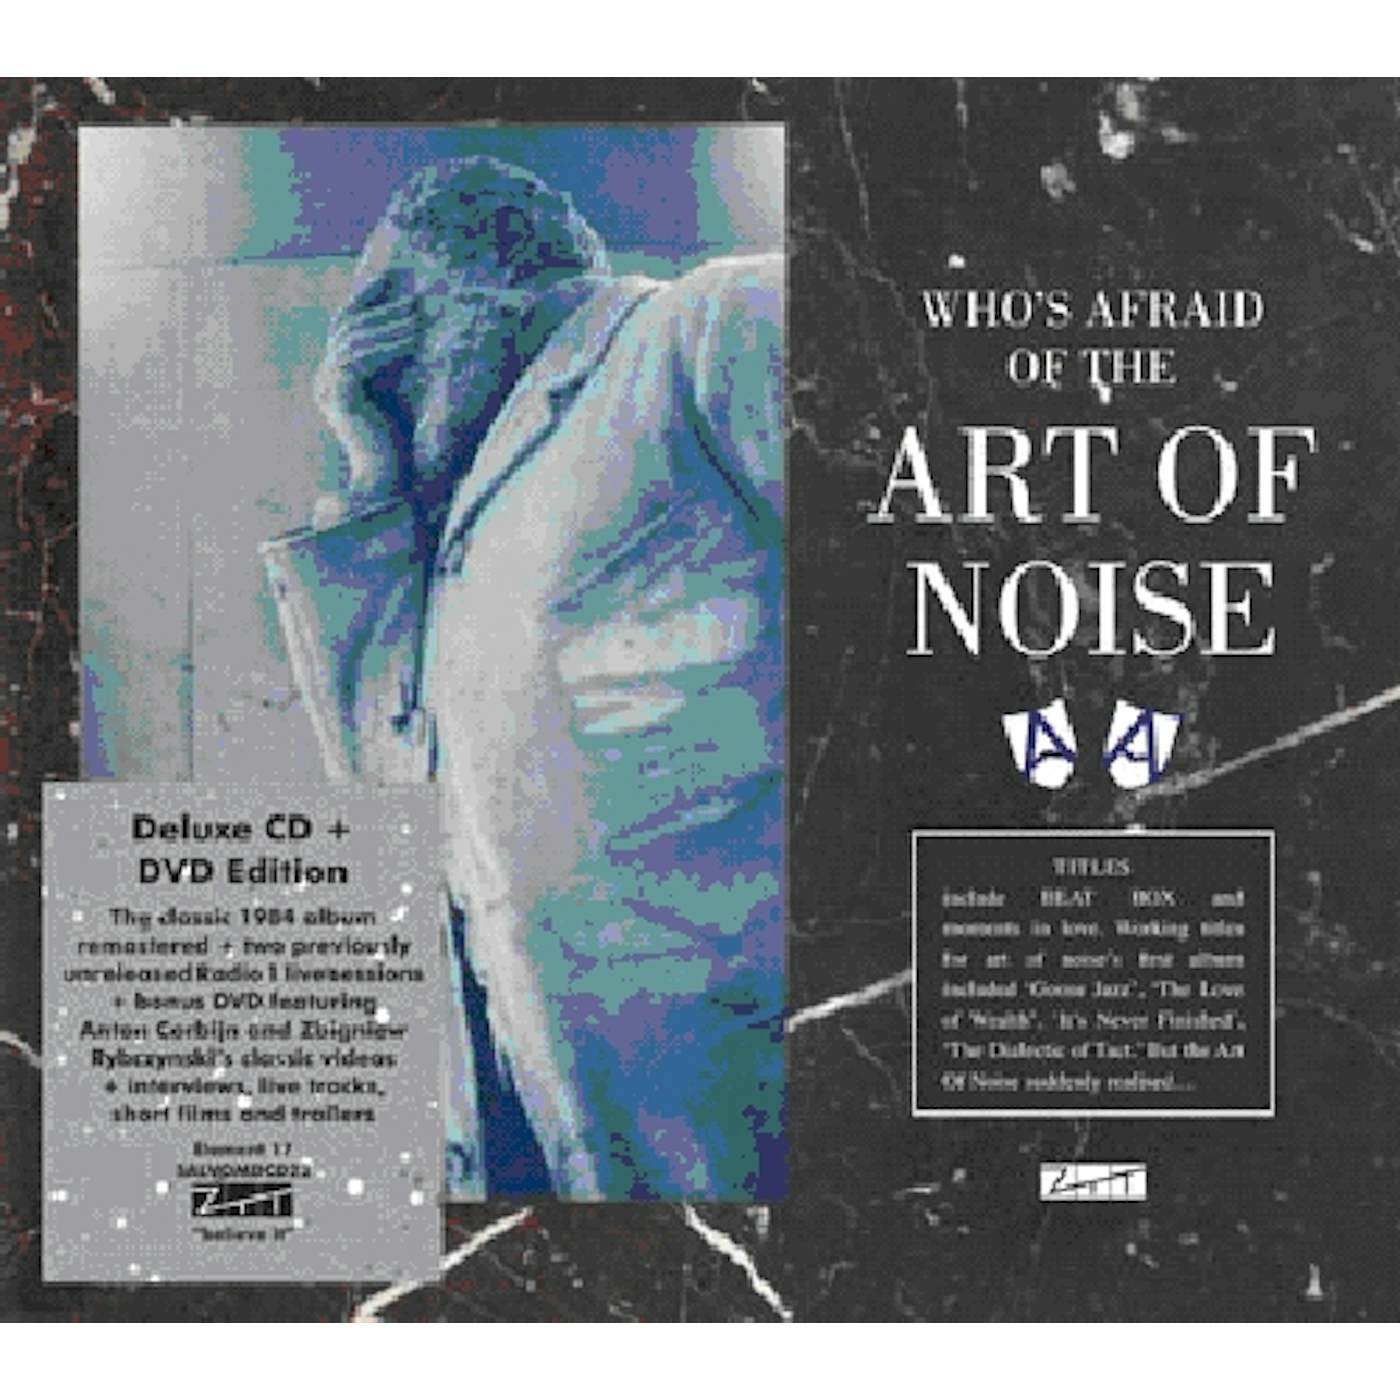 WHO'S AFRAID OF THE ART OF NOISE CD